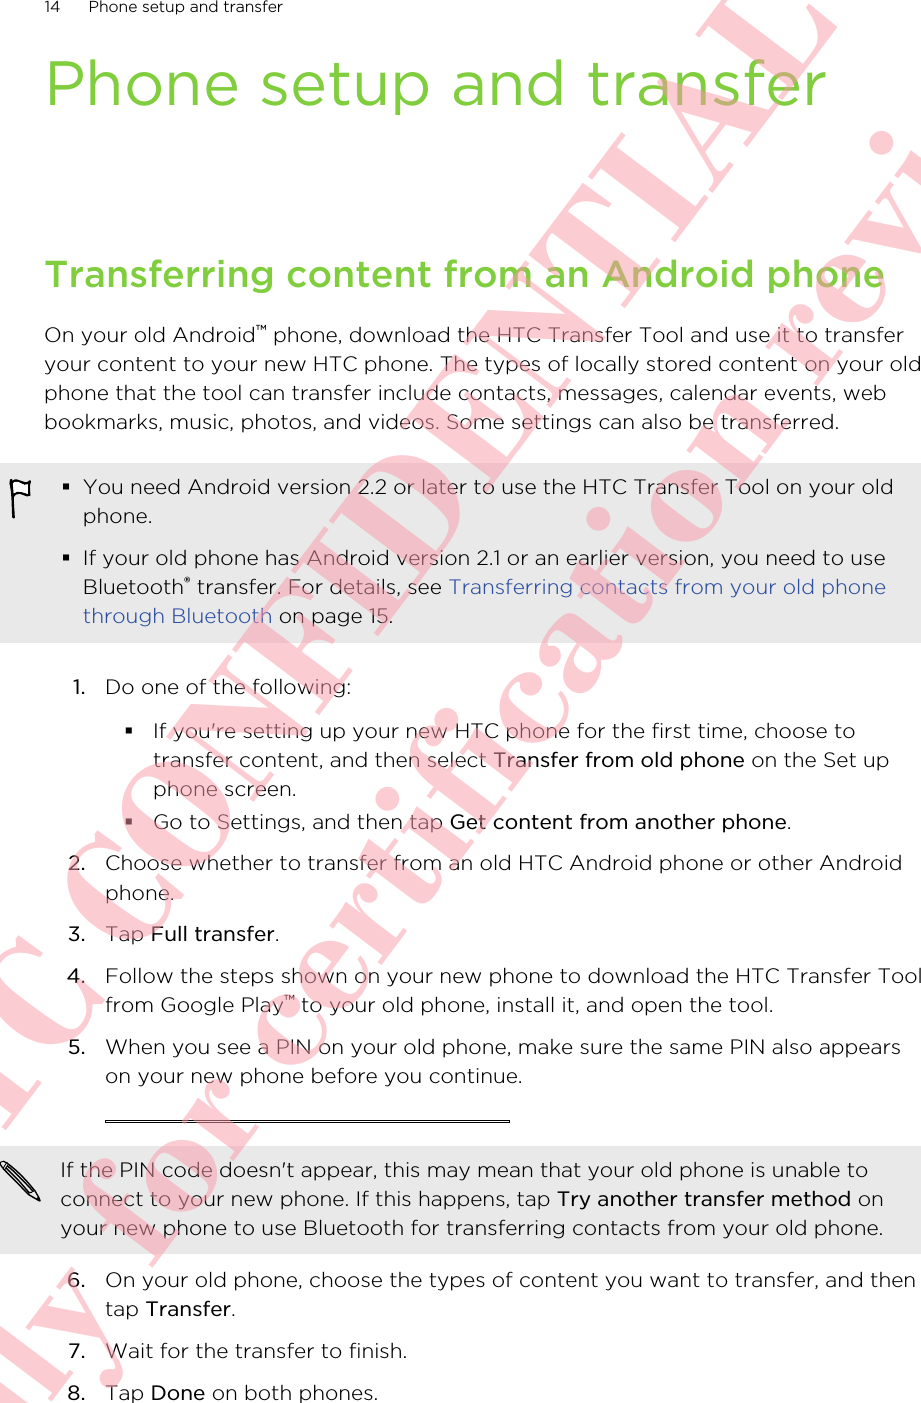 Phone setup and transferTransferring content from an Android phoneOn your old Android™ phone, download the HTC Transfer Tool and use it to transferyour content to your new HTC phone. The types of locally stored content on your oldphone that the tool can transfer include contacts, messages, calendar events, webbookmarks, music, photos, and videos. Some settings can also be transferred.§You need Android version 2.2 or later to use the HTC Transfer Tool on your oldphone.§If your old phone has Android version 2.1 or an earlier version, you need to useBluetooth® transfer. For details, see Transferring contacts from your old phonethrough Bluetooth on page 15.1. Do one of the following:§If you&apos;re setting up your new HTC phone for the first time, choose totransfer content, and then select Transfer from old phone on the Set upphone screen.§Go to Settings, and then tap Get content from another phone.2. Choose whether to transfer from an old HTC Android phone or other Androidphone.3. Tap Full transfer.4. Follow the steps shown on your new phone to download the HTC Transfer Toolfrom Google Play™ to your old phone, install it, and open the tool.5. When you see a PIN on your old phone, make sure the same PIN also appearson your new phone before you continue. If the PIN code doesn&apos;t appear, this may mean that your old phone is unable toconnect to your new phone. If this happens, tap Try another transfer method onyour new phone to use Bluetooth for transferring contacts from your old phone.6. On your old phone, choose the types of content you want to transfer, and thentap Transfer.7. Wait for the transfer to finish.8. Tap Done on both phones.14 Phone setup and transfer      HTC CONFIDENTIAL Only for certification review